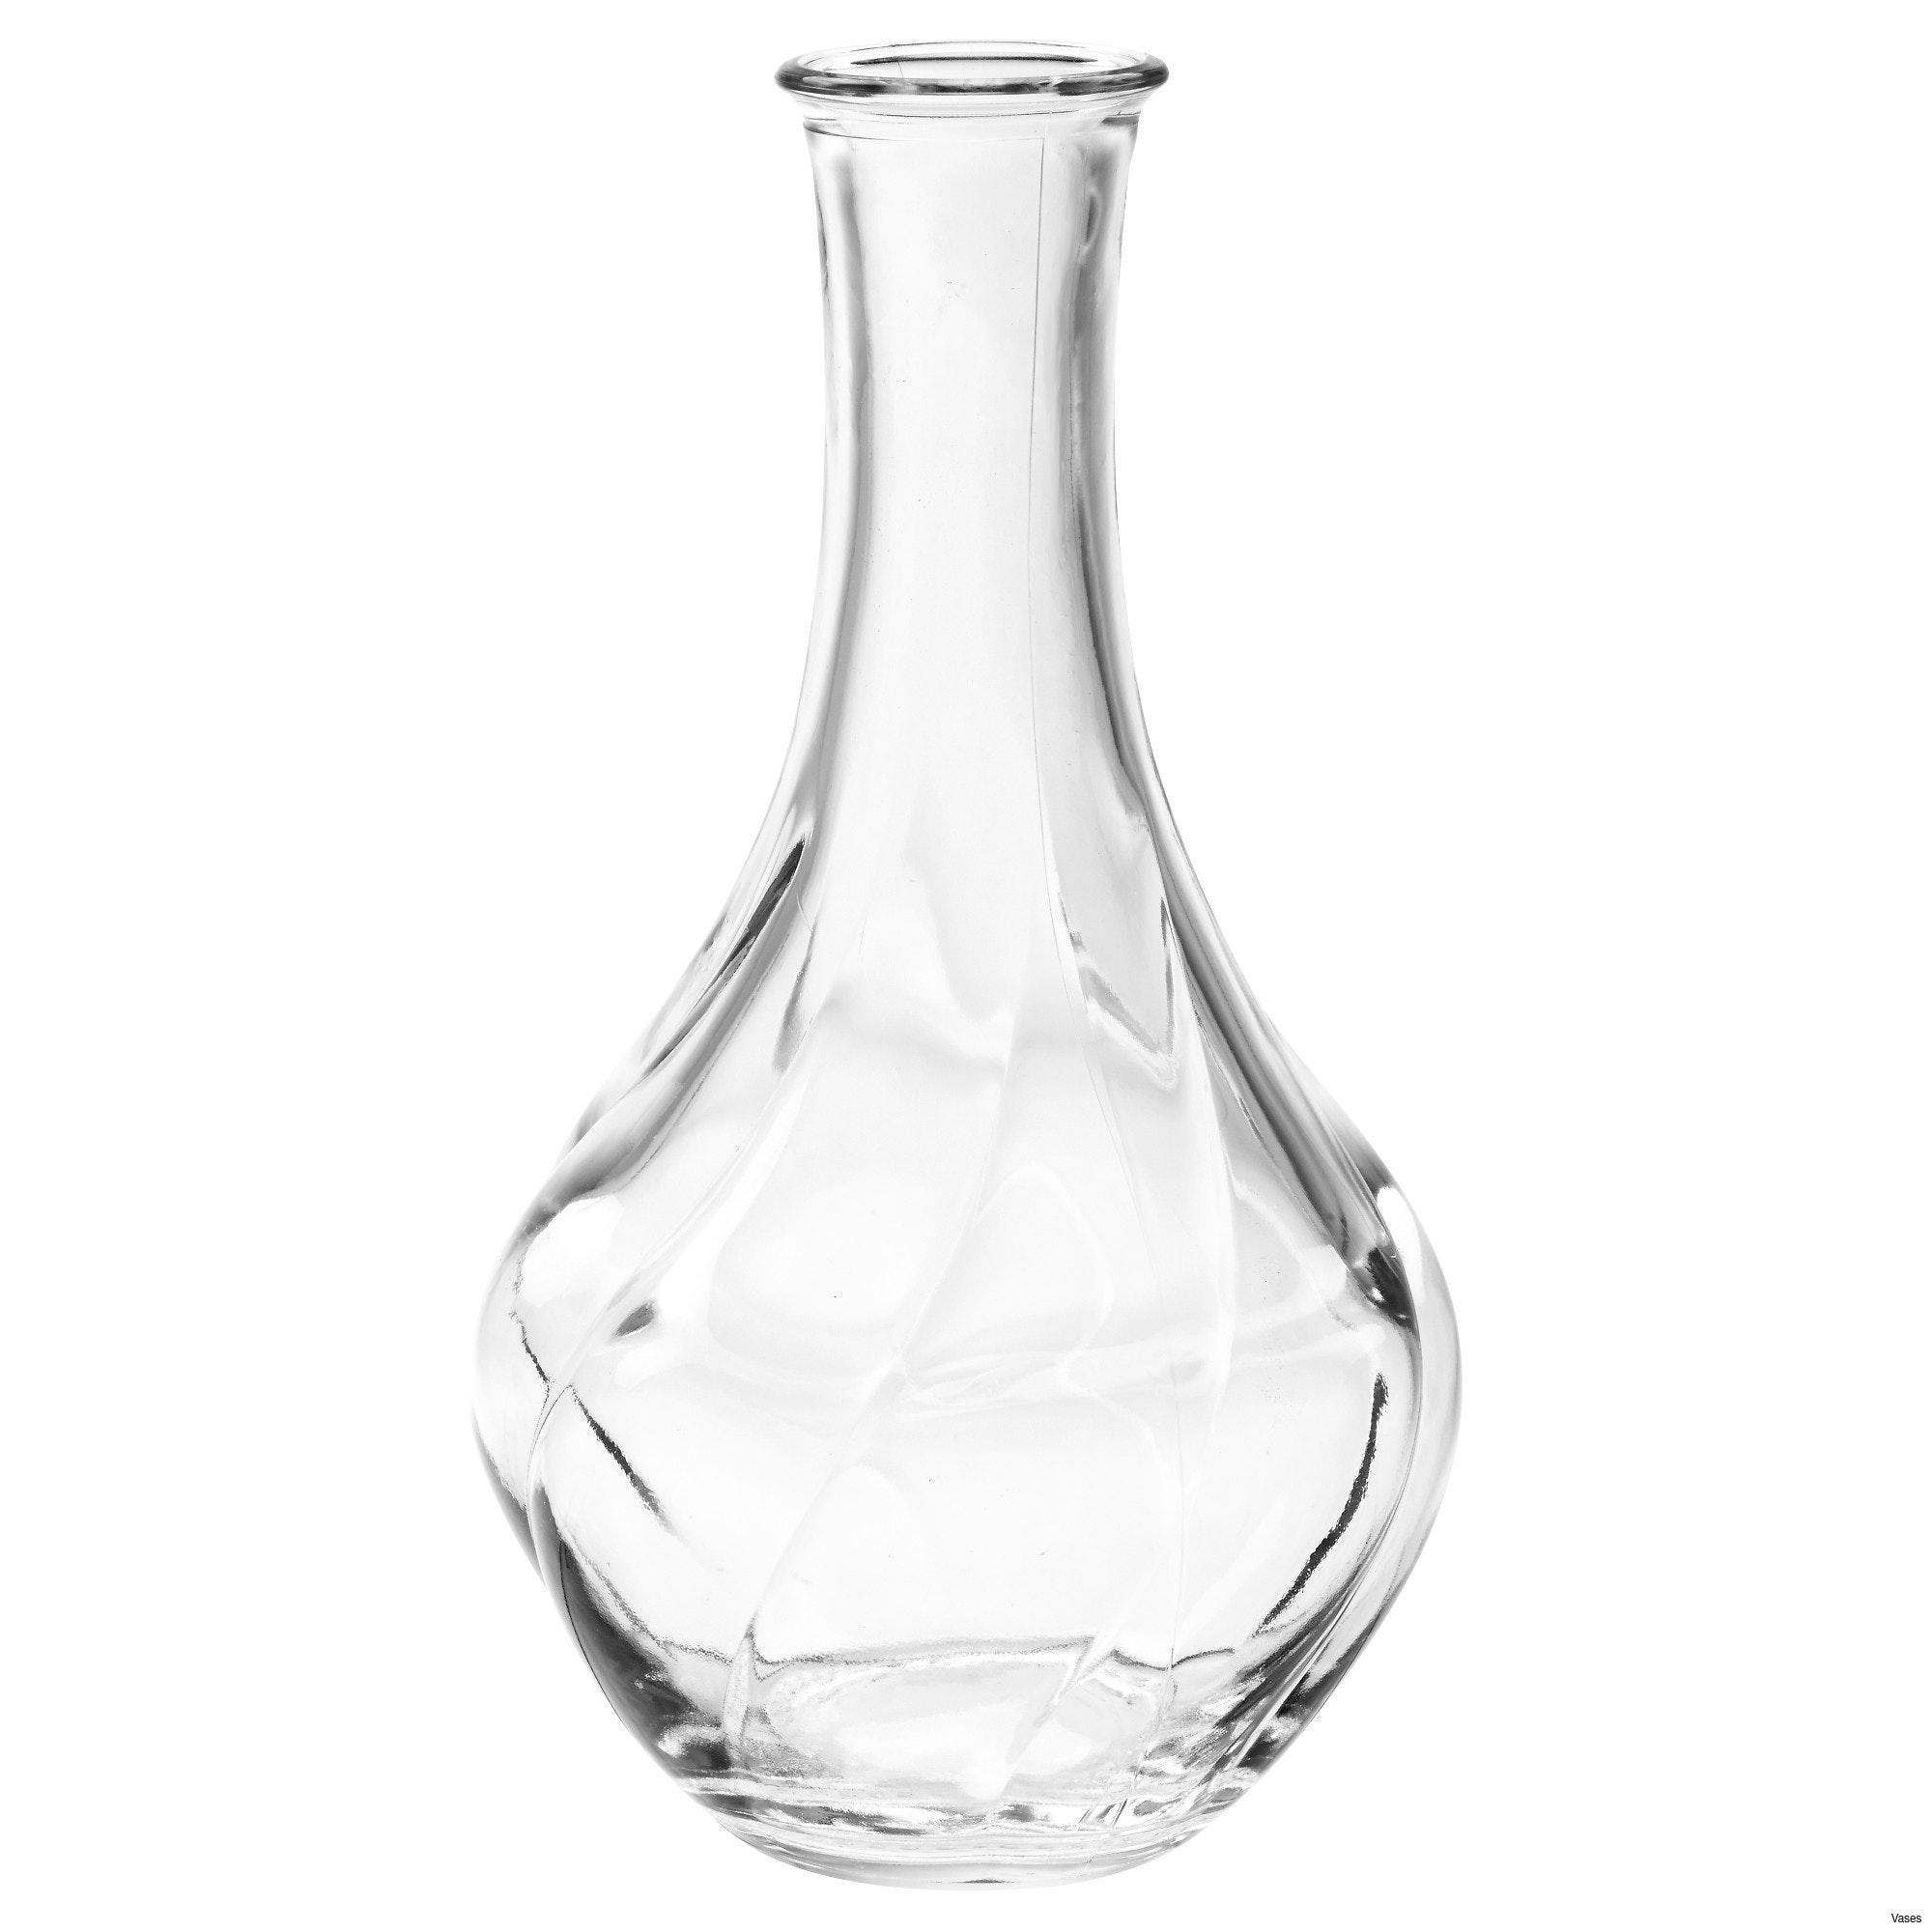 29 Popular Inexpensive Silver Vases 2024 free download inexpensive silver vases of unique crystal vase awards beginneryogaclassesnear me in living room glass vases fresh clear vase 0d tags amazing and also white interior pattern